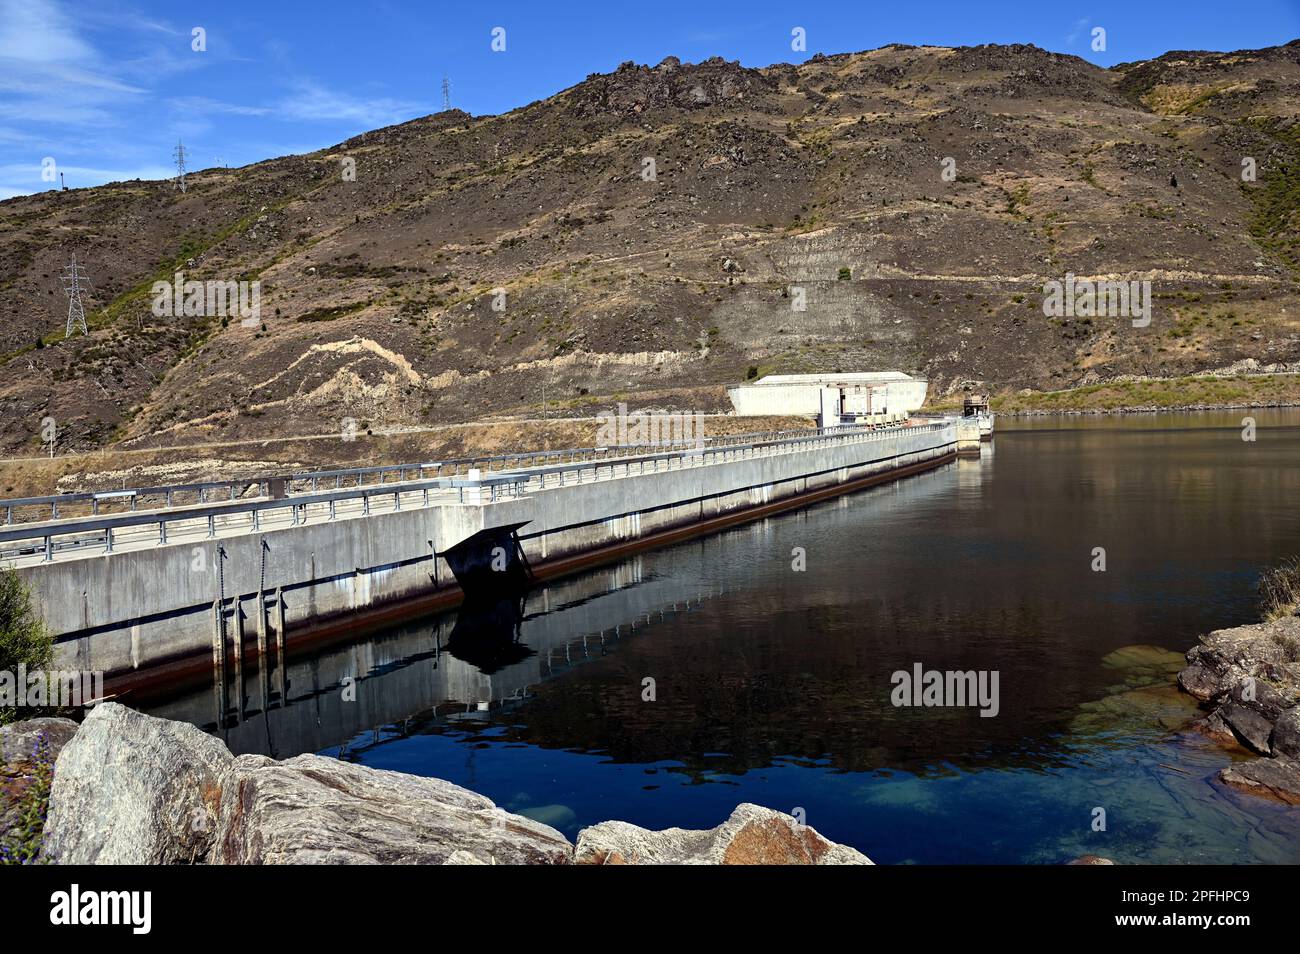 Clyde Dam on the Clutha River, in Central Otago, South Island, New Zealand. It is the largest concrete gravity dam in New Zealand. Stock Photo